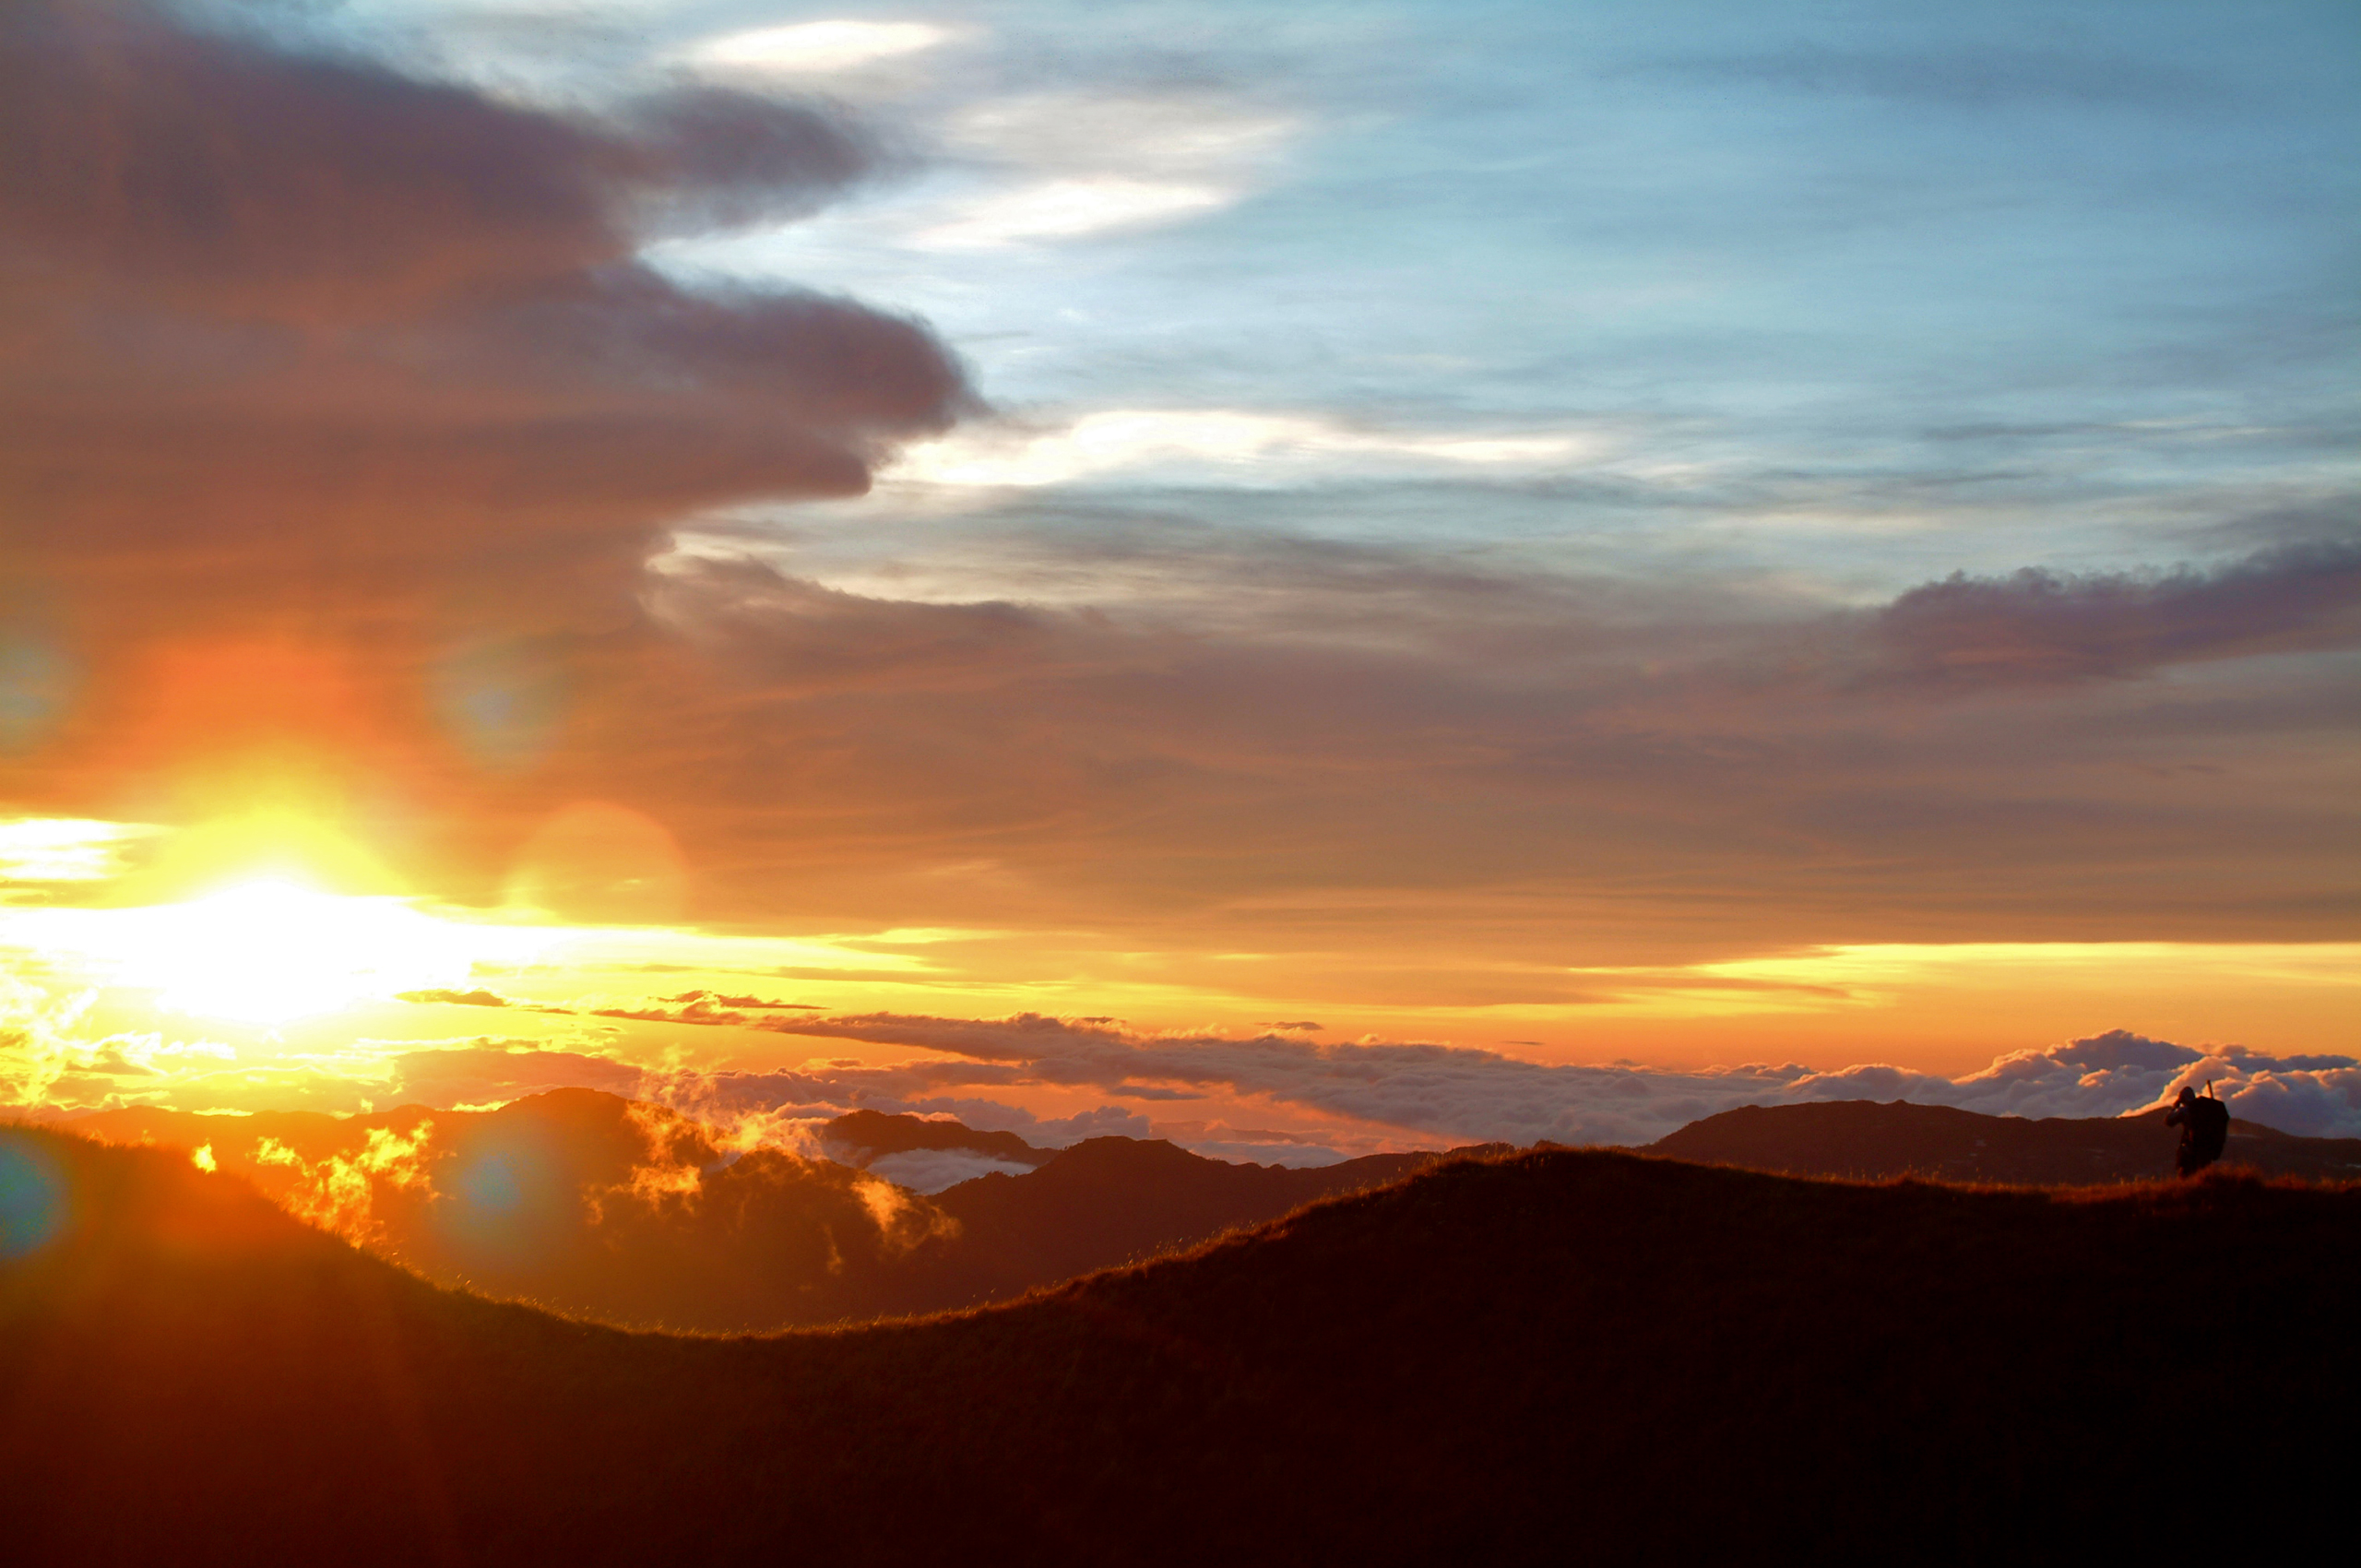 Sunset over Mt. Pulag